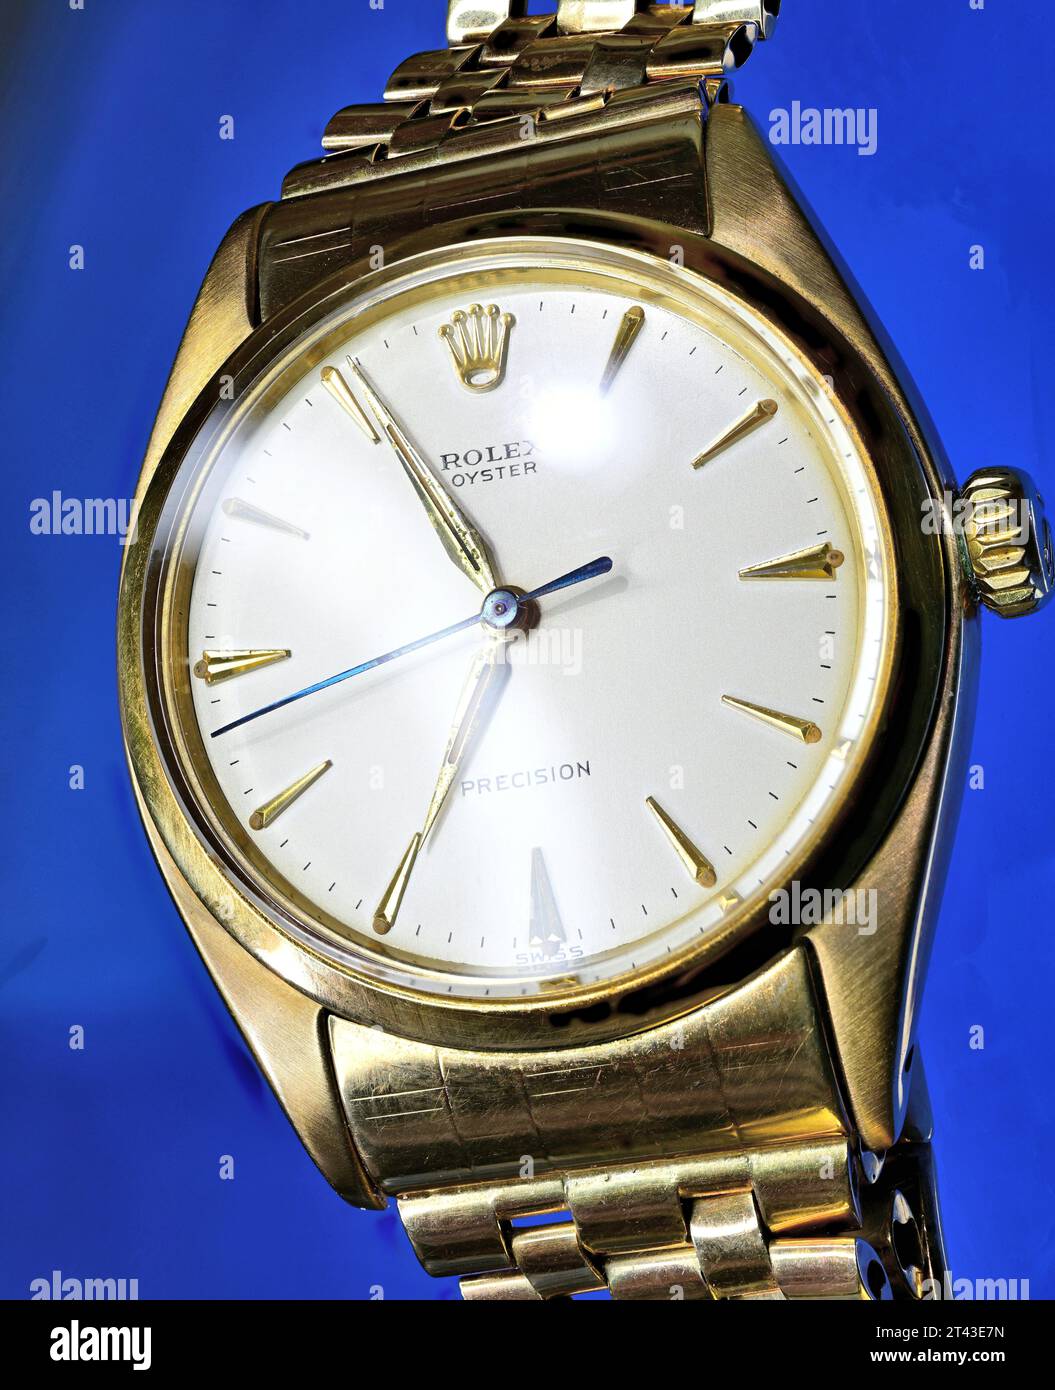 Gold Rolex Oyster wristwatch against a deep blue background Stock Photo